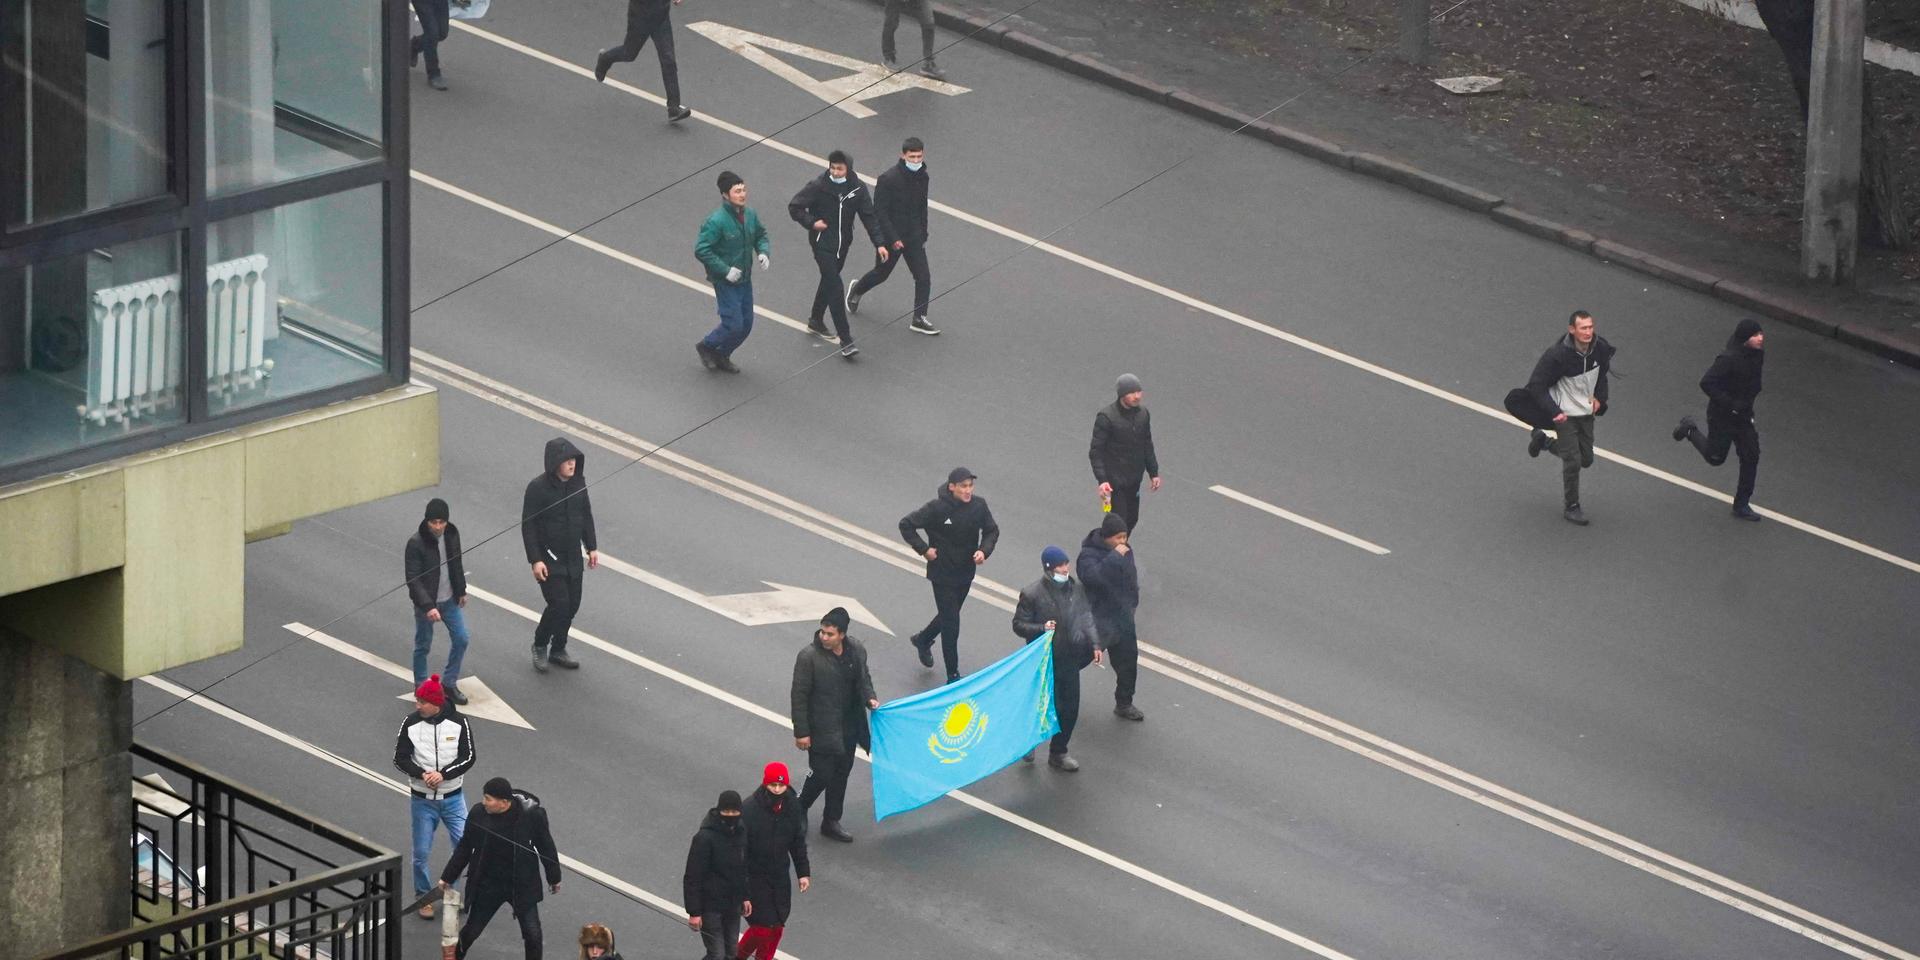 Demonstrators with Kazakhstan&apos;s national flag march during a protest in Almaty, Kazakhstan, Wednesday, Jan. 5, 2022. Demonstrators denouncing the doubling of prices for liquefied gas have clashed with police in Kazakhstan&apos;s largest city and held protests in about a dozen other cities in the country. (AP Photo/Vladimir Tretyakov)  XAZ126